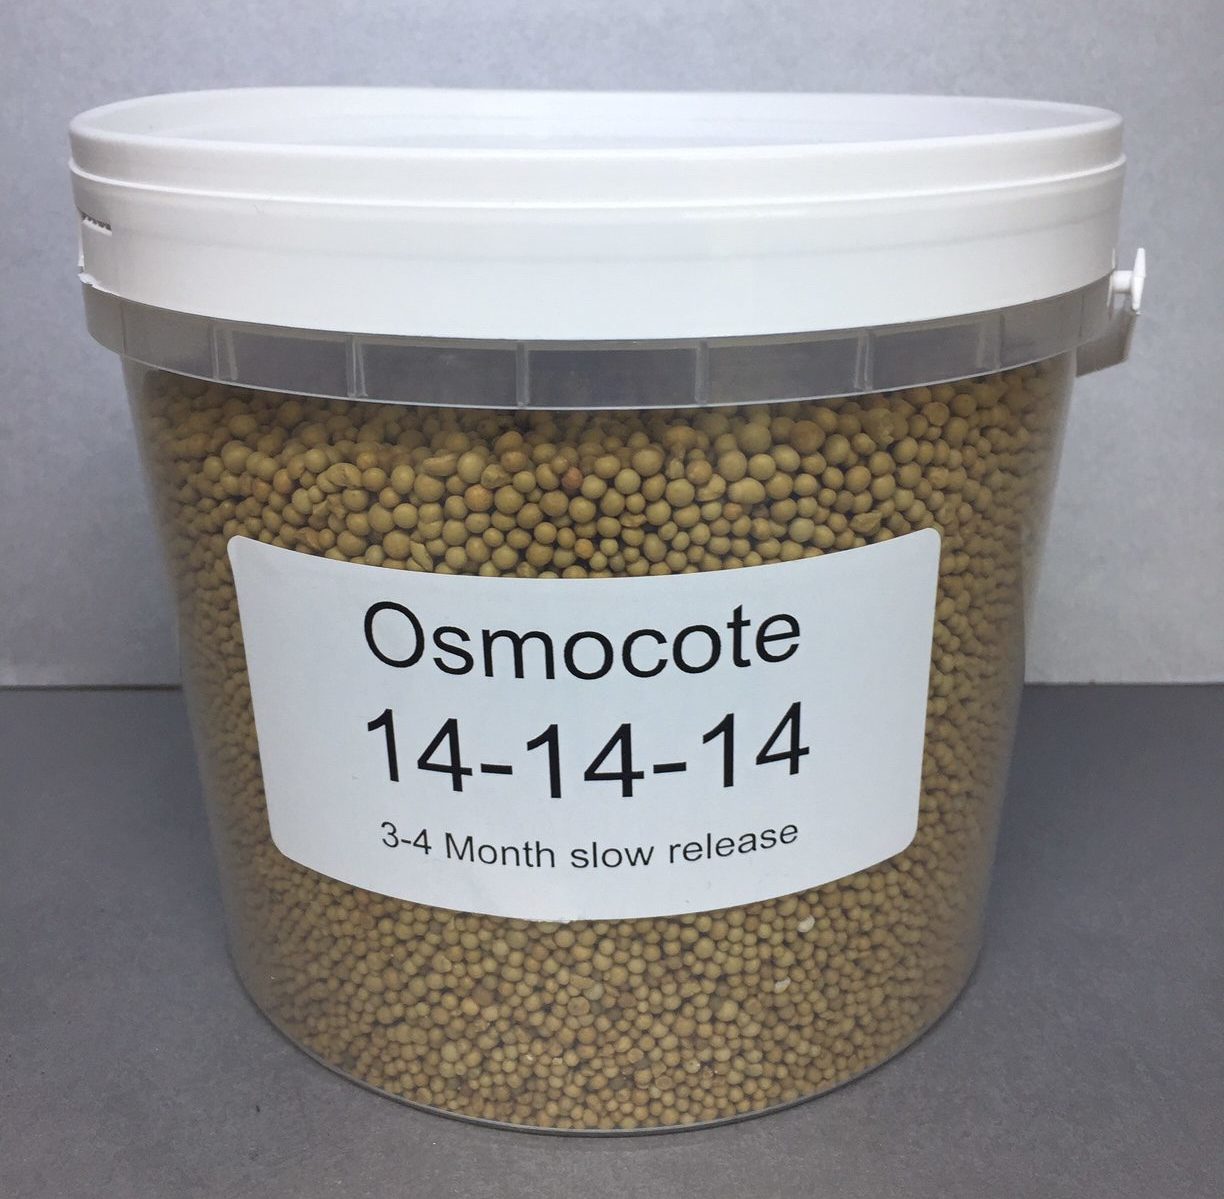 Osmocote 14-14-14 Slow Release - Jons Plant Factory